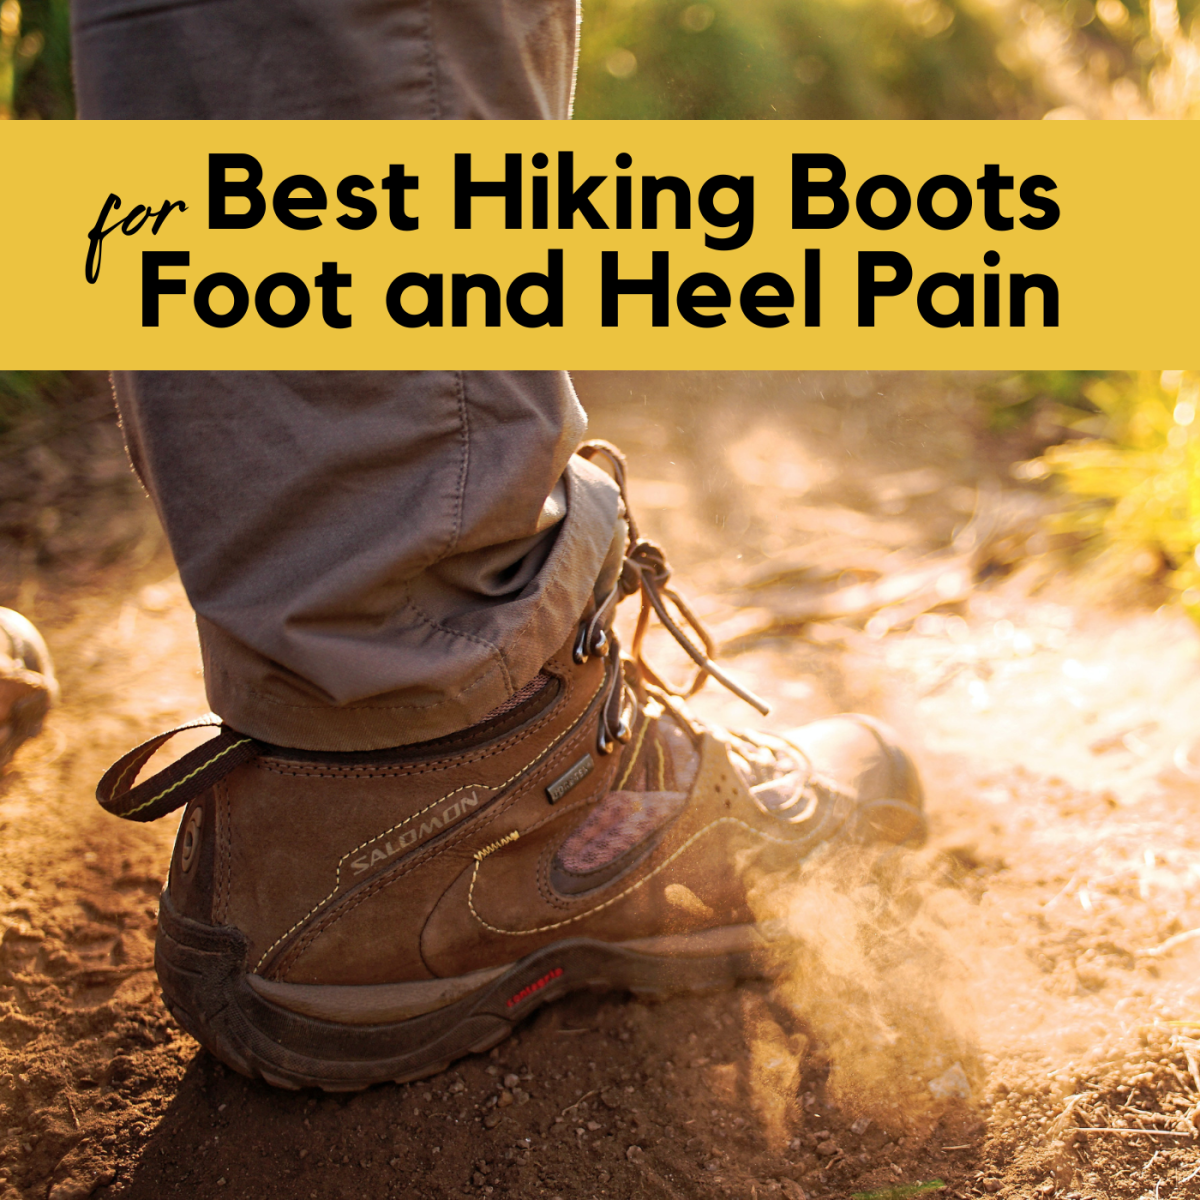 Best Hiking Boots for Foot and Heel Pain